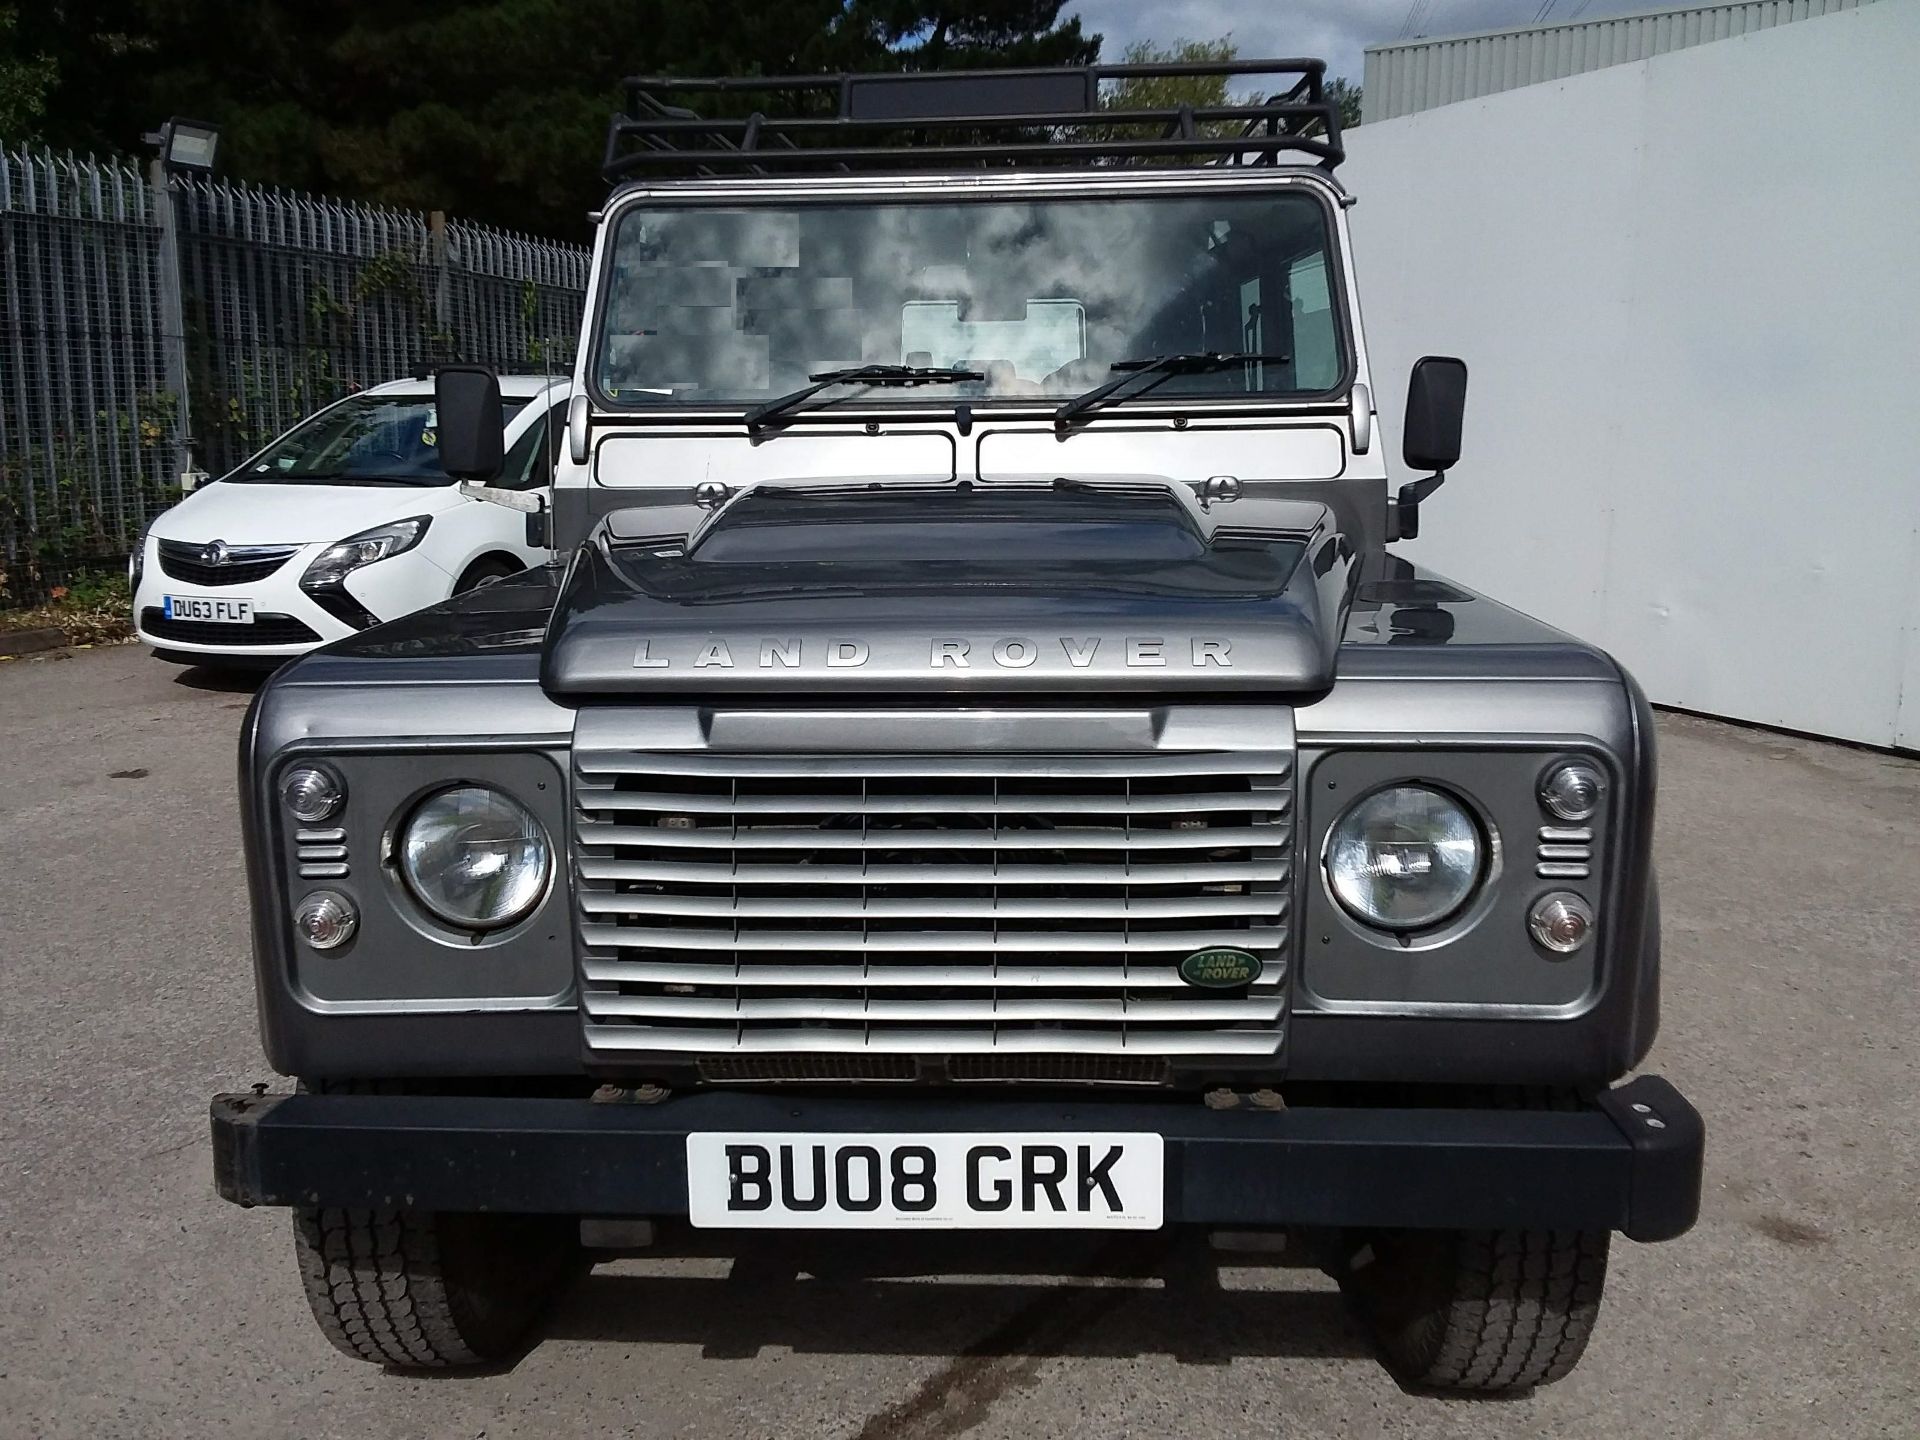 2008/08 REG LAND ROVER DEFENDER 110 XS LWB STATION WAGON 2.4 DIESEL, 7 SEATER, AIR CON *NO VAT* - Image 2 of 10